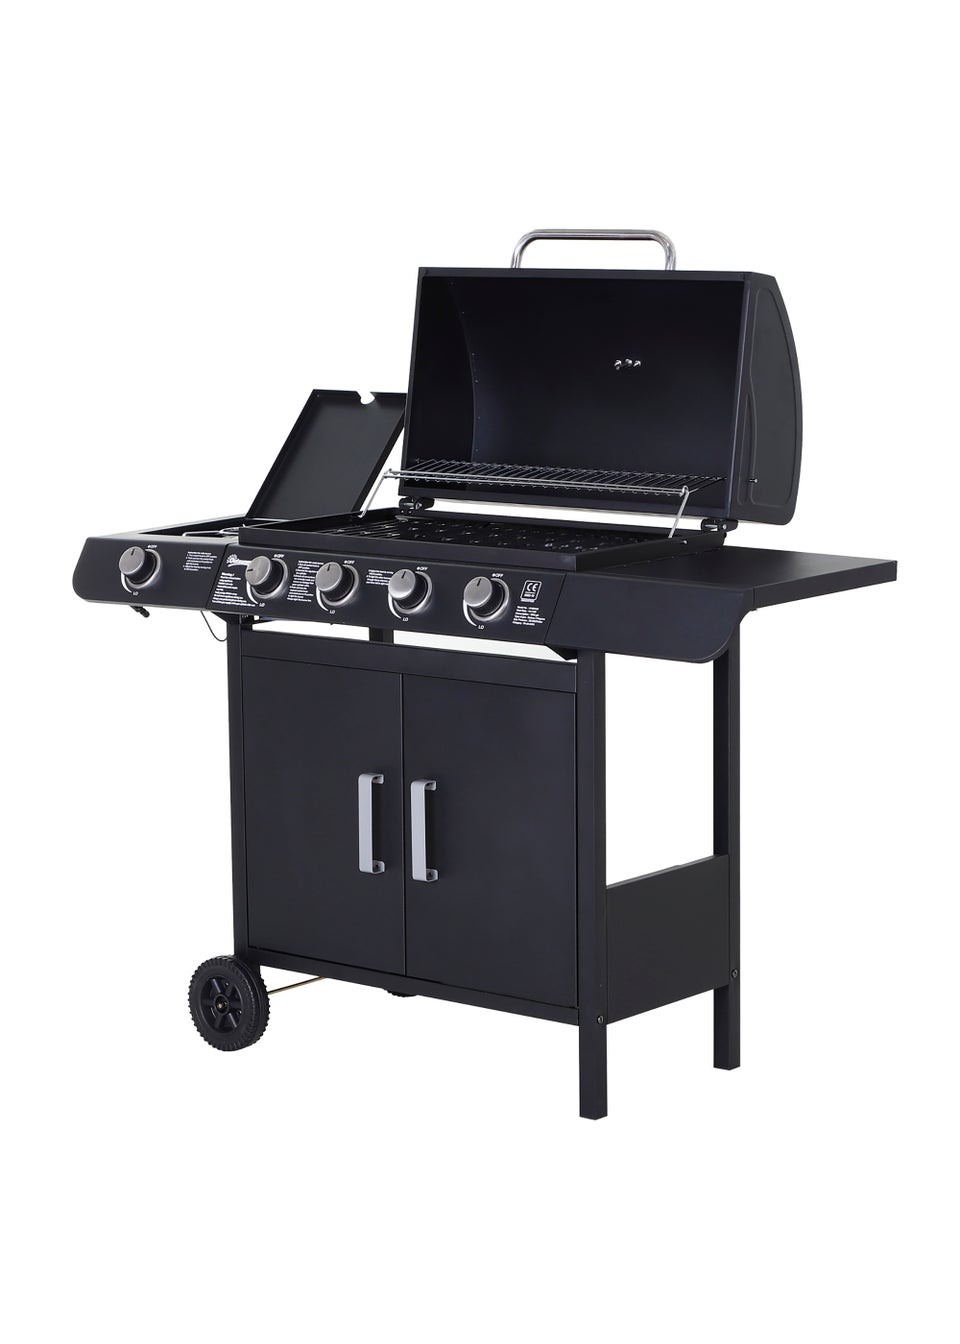 Outsunny 4+1 Gas Burner Grill BBQ Trolley with Storage Side Table and Wheels